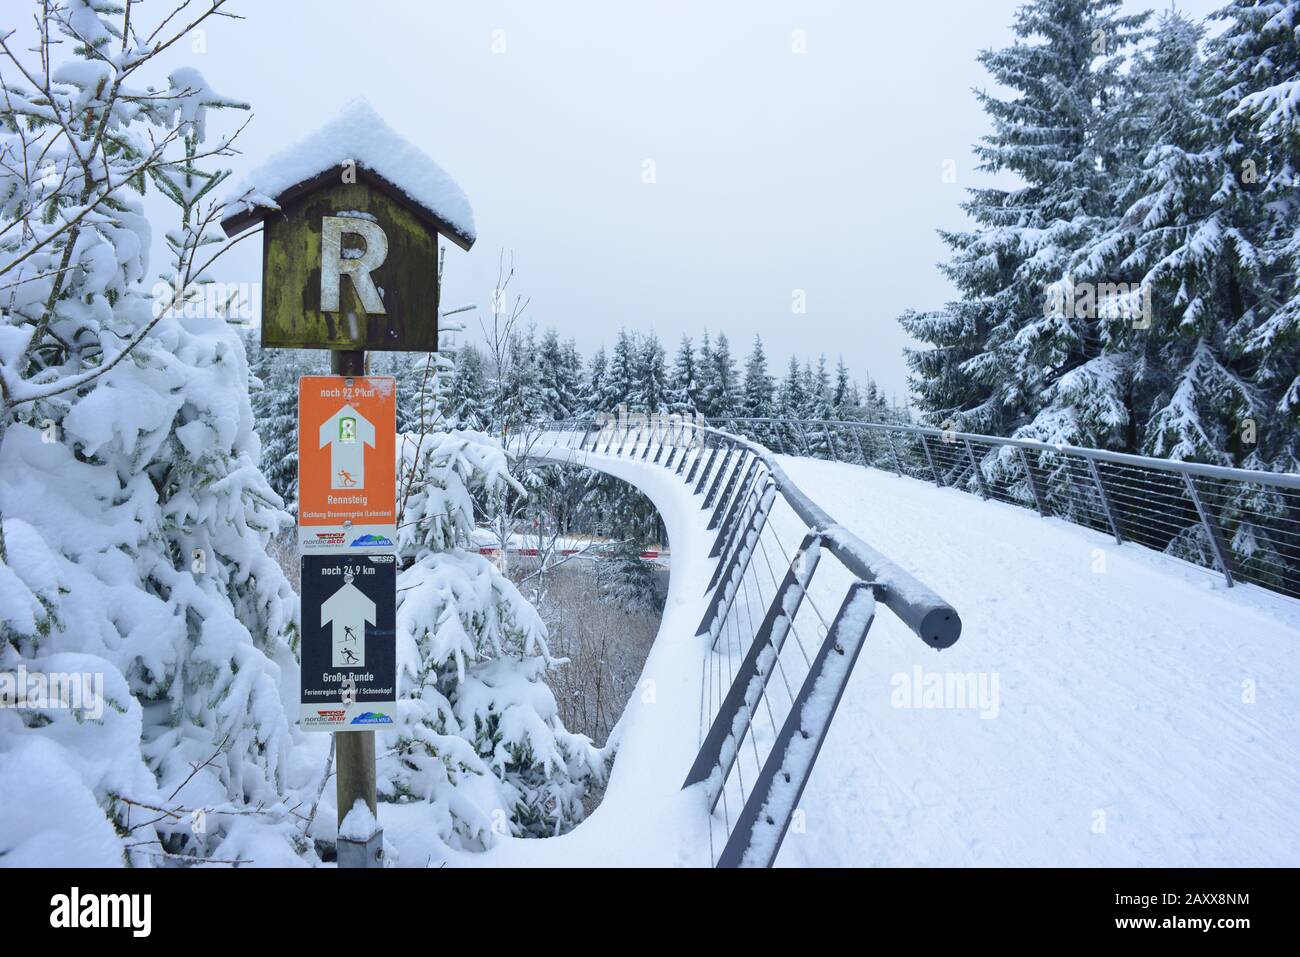 Oberhof, Germany 12-14-2019 Rennsteig hike path with signs bridge for skiing and wintersport Stock Photo